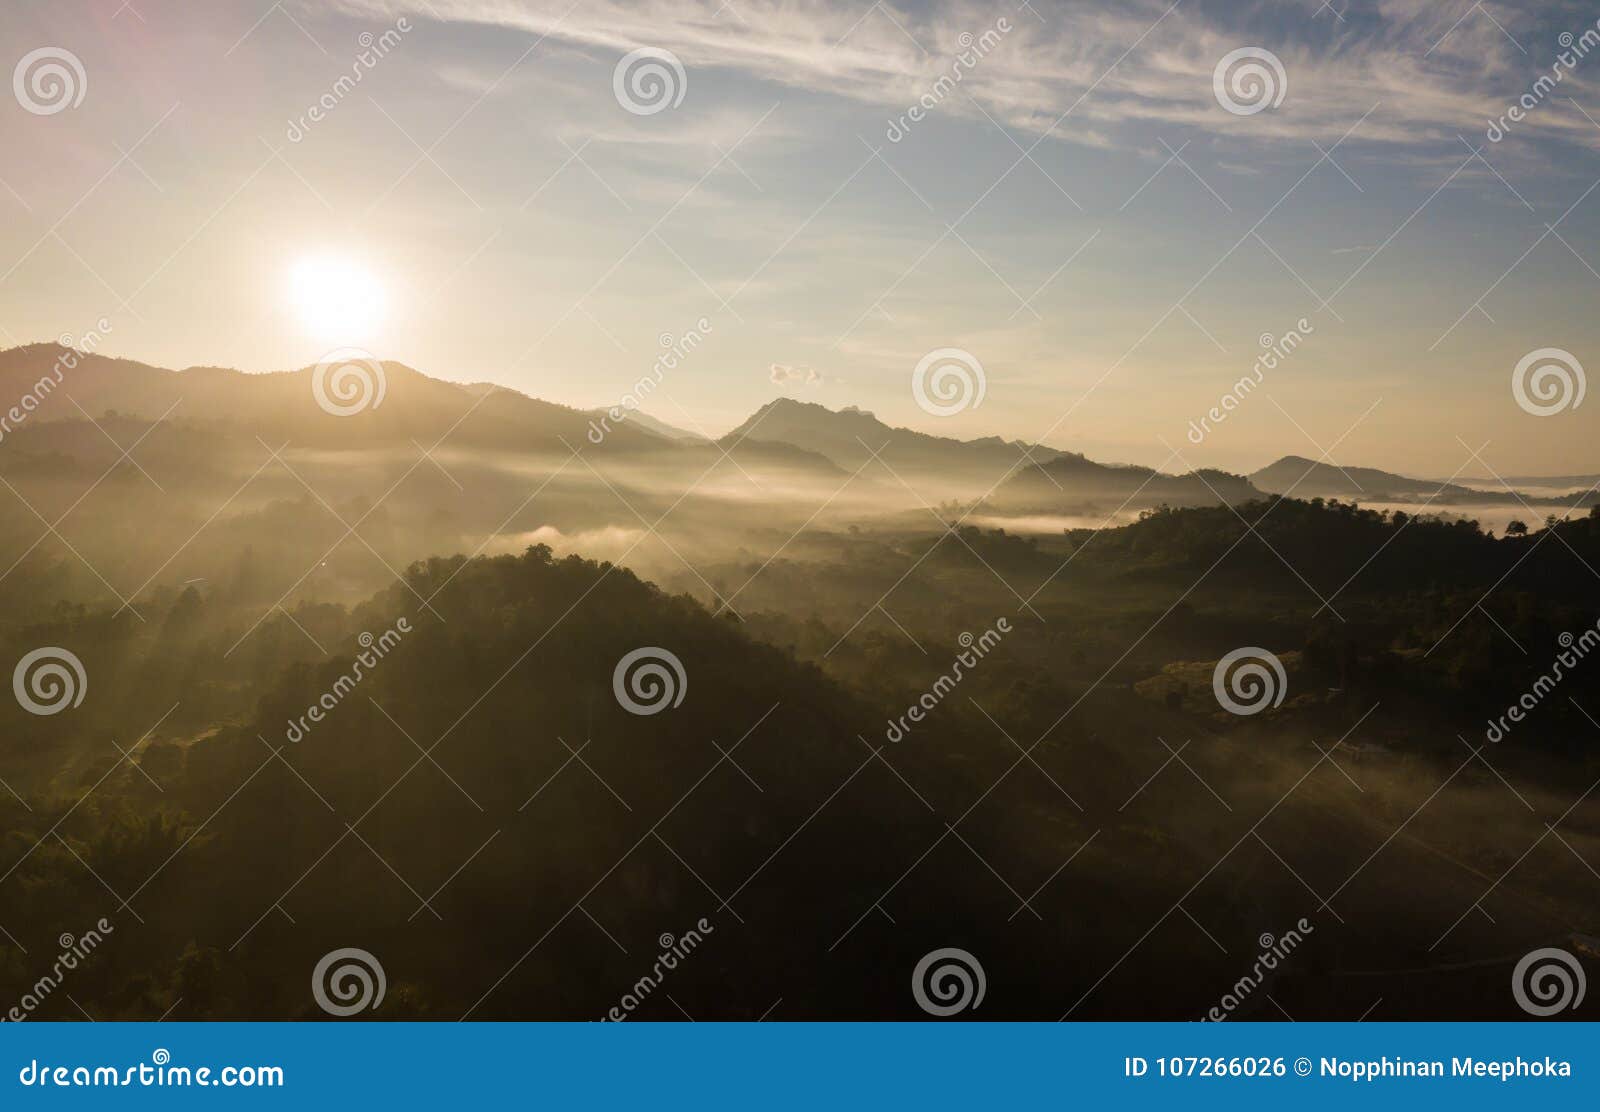 Mountains And Trees With Beautiful Clouds And Sky In Sunrise Stock Photo Image Of Forest Kanchanaburi